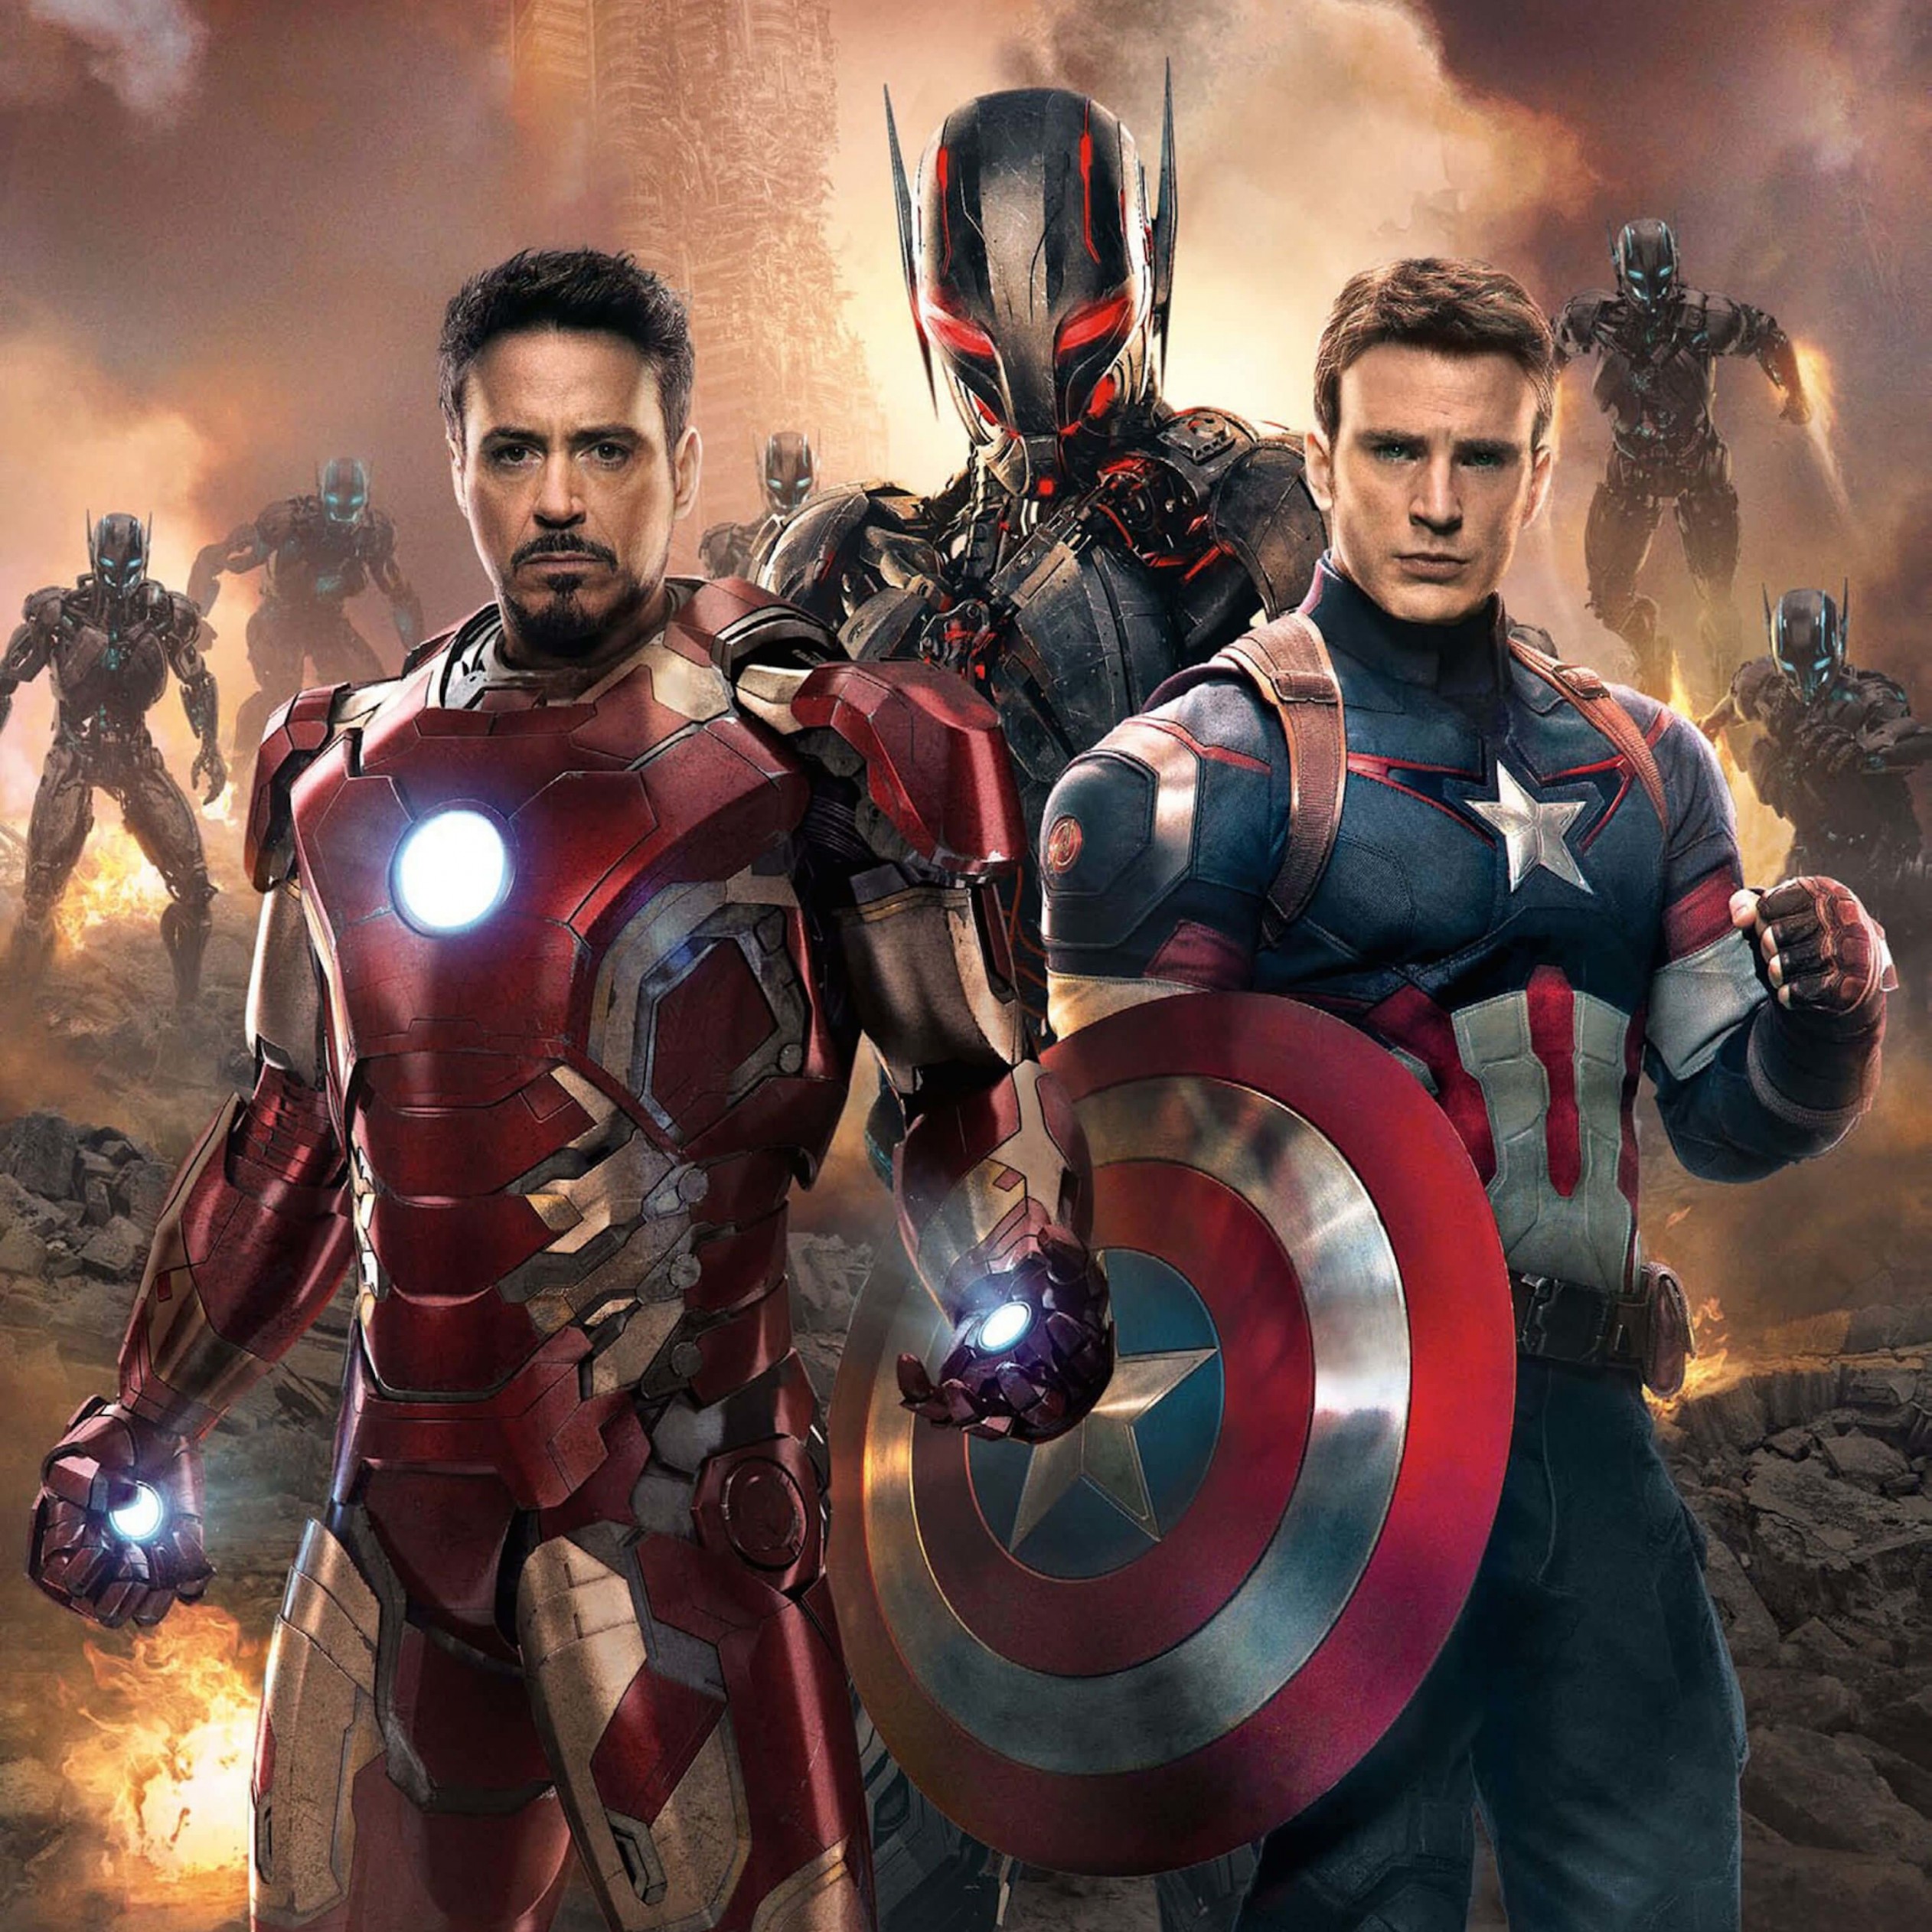 The Avengers: Age of Ultron - Iron Man and Captain America Wallpaper for Apple iPad Air